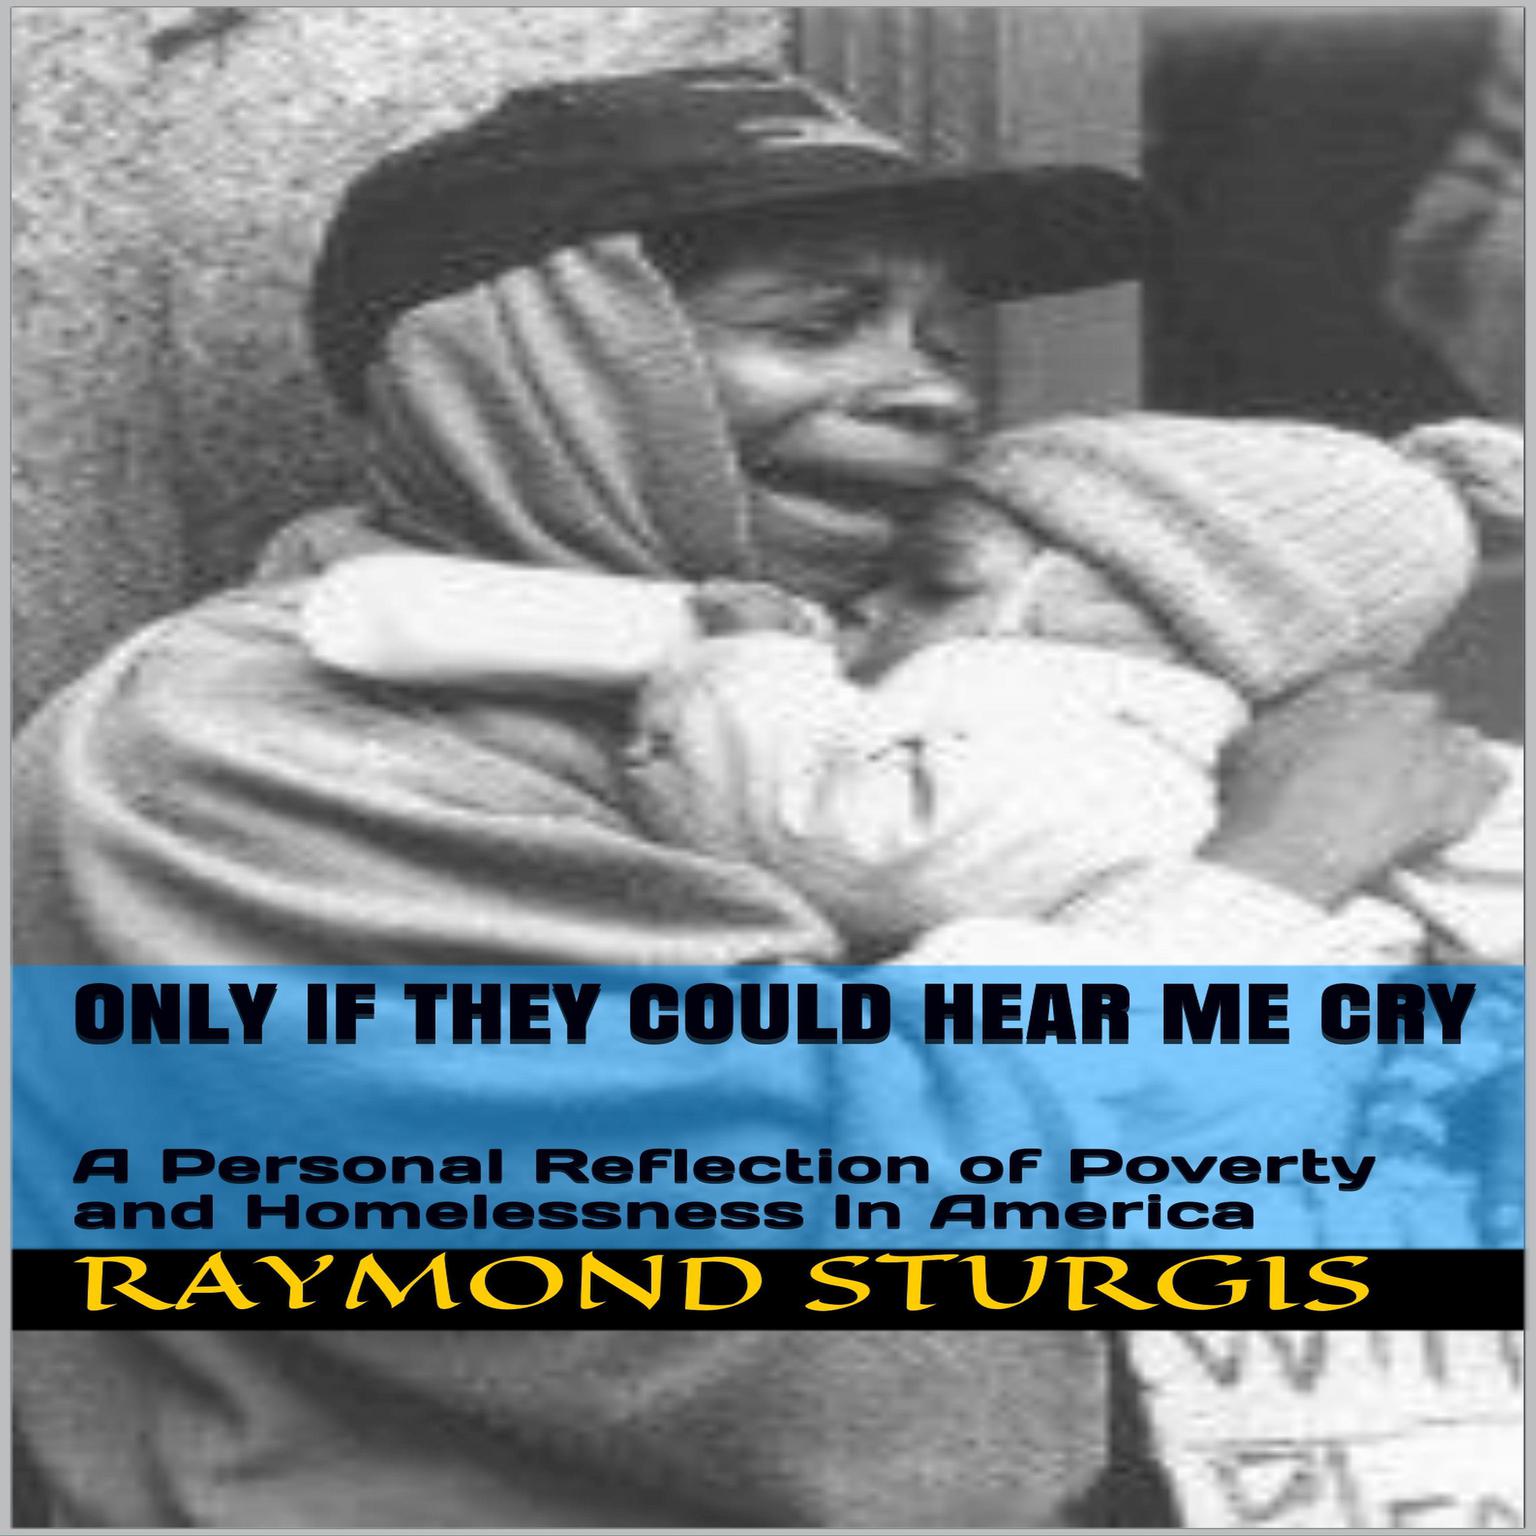 ONLY IF THEY COULD HEAR ME CRY: A Personal Reflection of Poverty and Homelessness In America: A Personal Reflection of Poverty and Homelessness In America Audiobook, by Raymond Sturgis